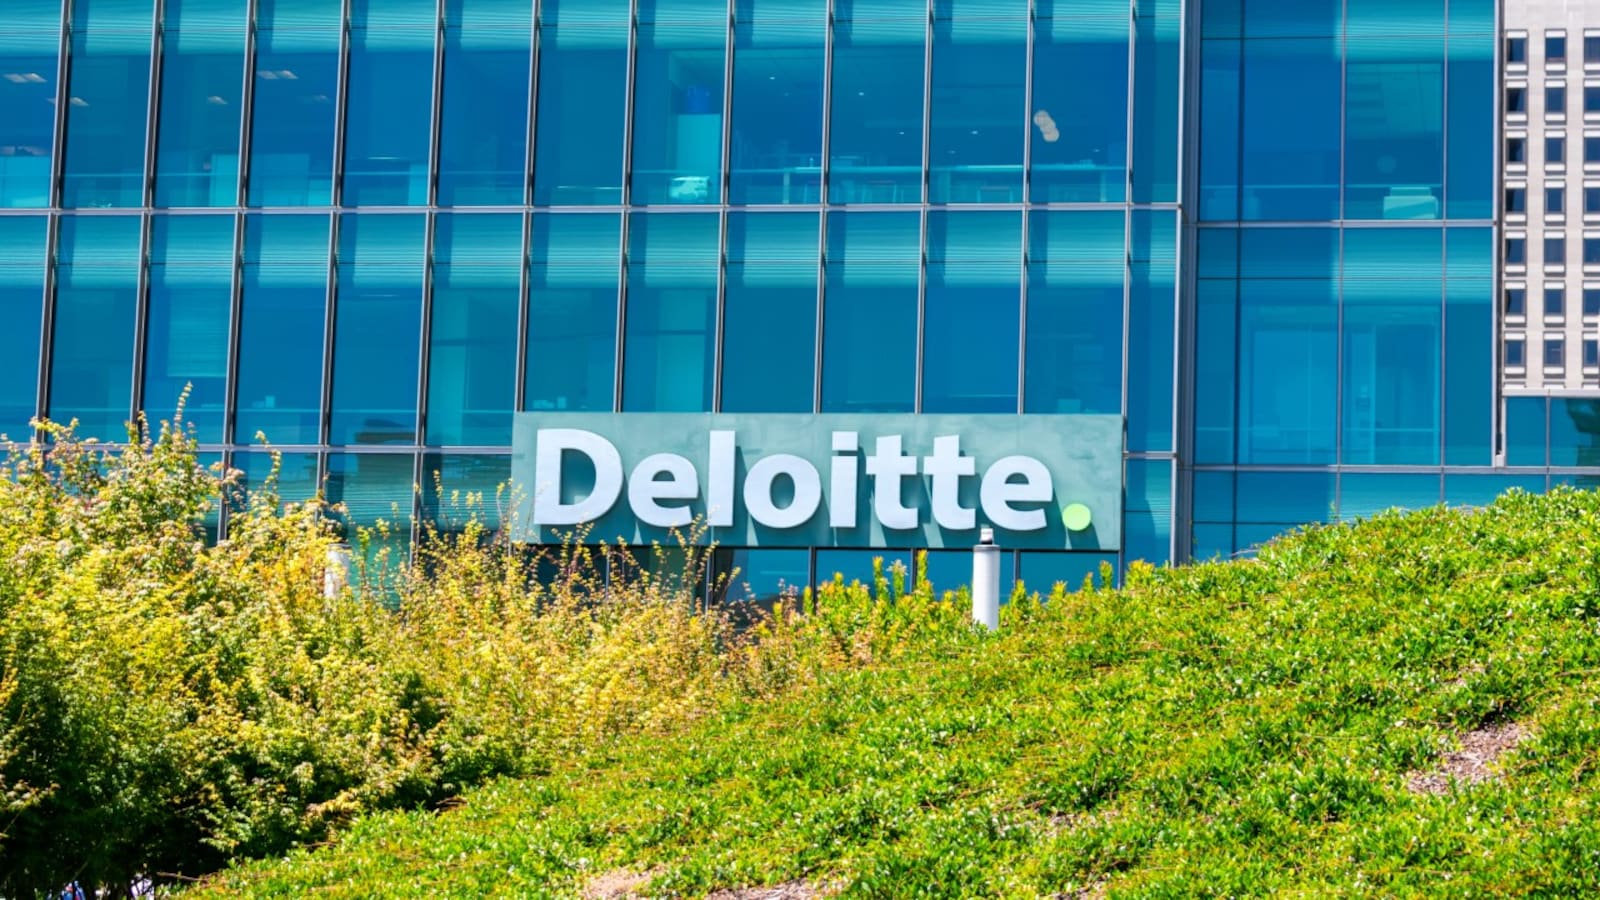 How Deloitte Has Repeatedly Failed To Live Up To The High Ethical And Professional Standards